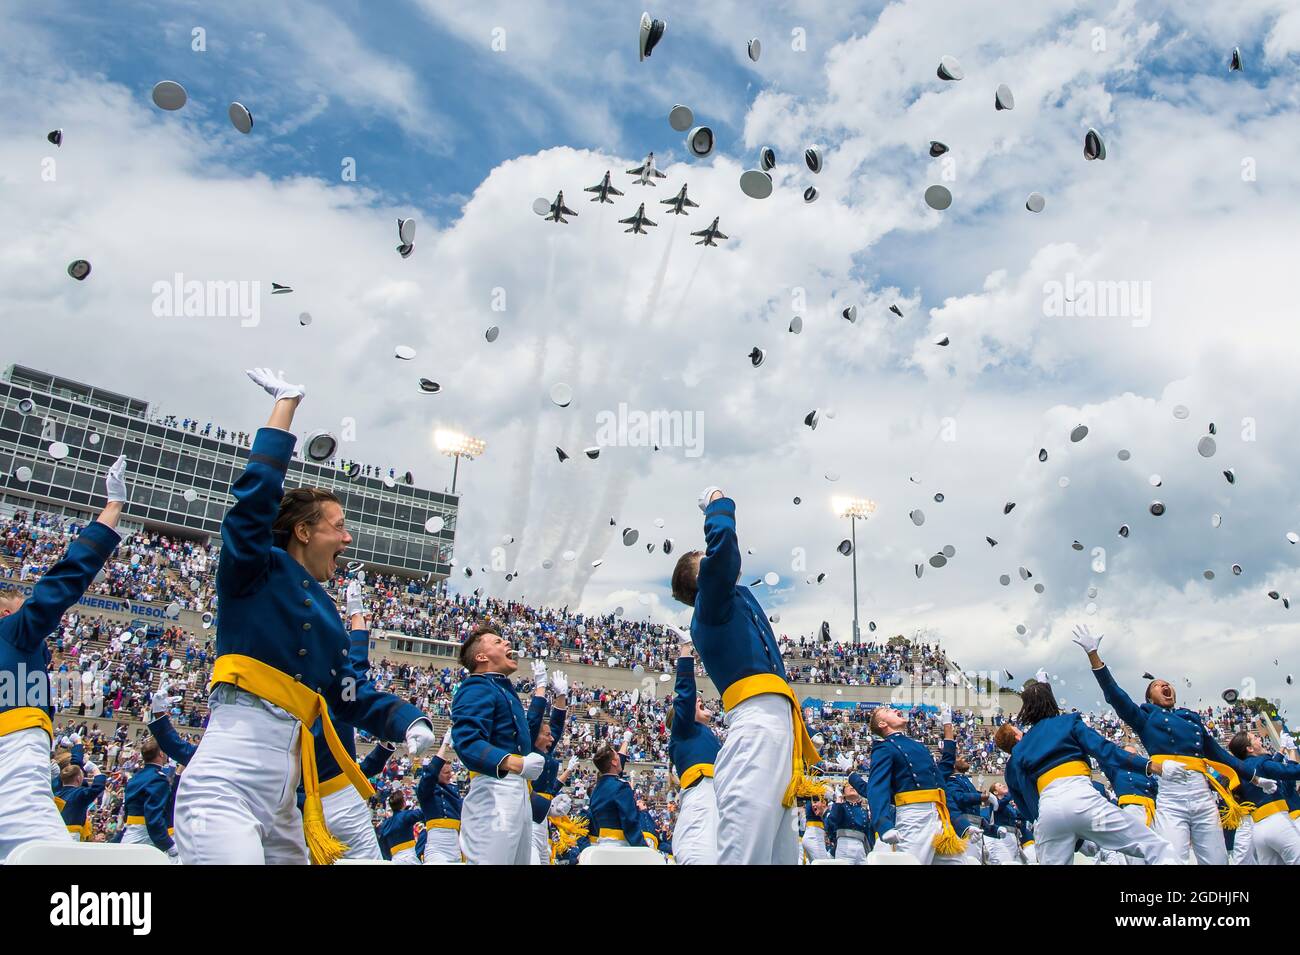 U.S. Air Force Academy Class of 2021 graduates toss their service caps as the U.S. Air Force Thunderbirds fly overhead during the Academy’s graduation ceremony in Colorado Springs, Colo., May 26, 2021. A total of 1,019 cadets crossed the stage to become the Air Force and Space Force’s newest second lieutenants. (U.S. Air Force photo by Trevor Cokley) Stock Photo